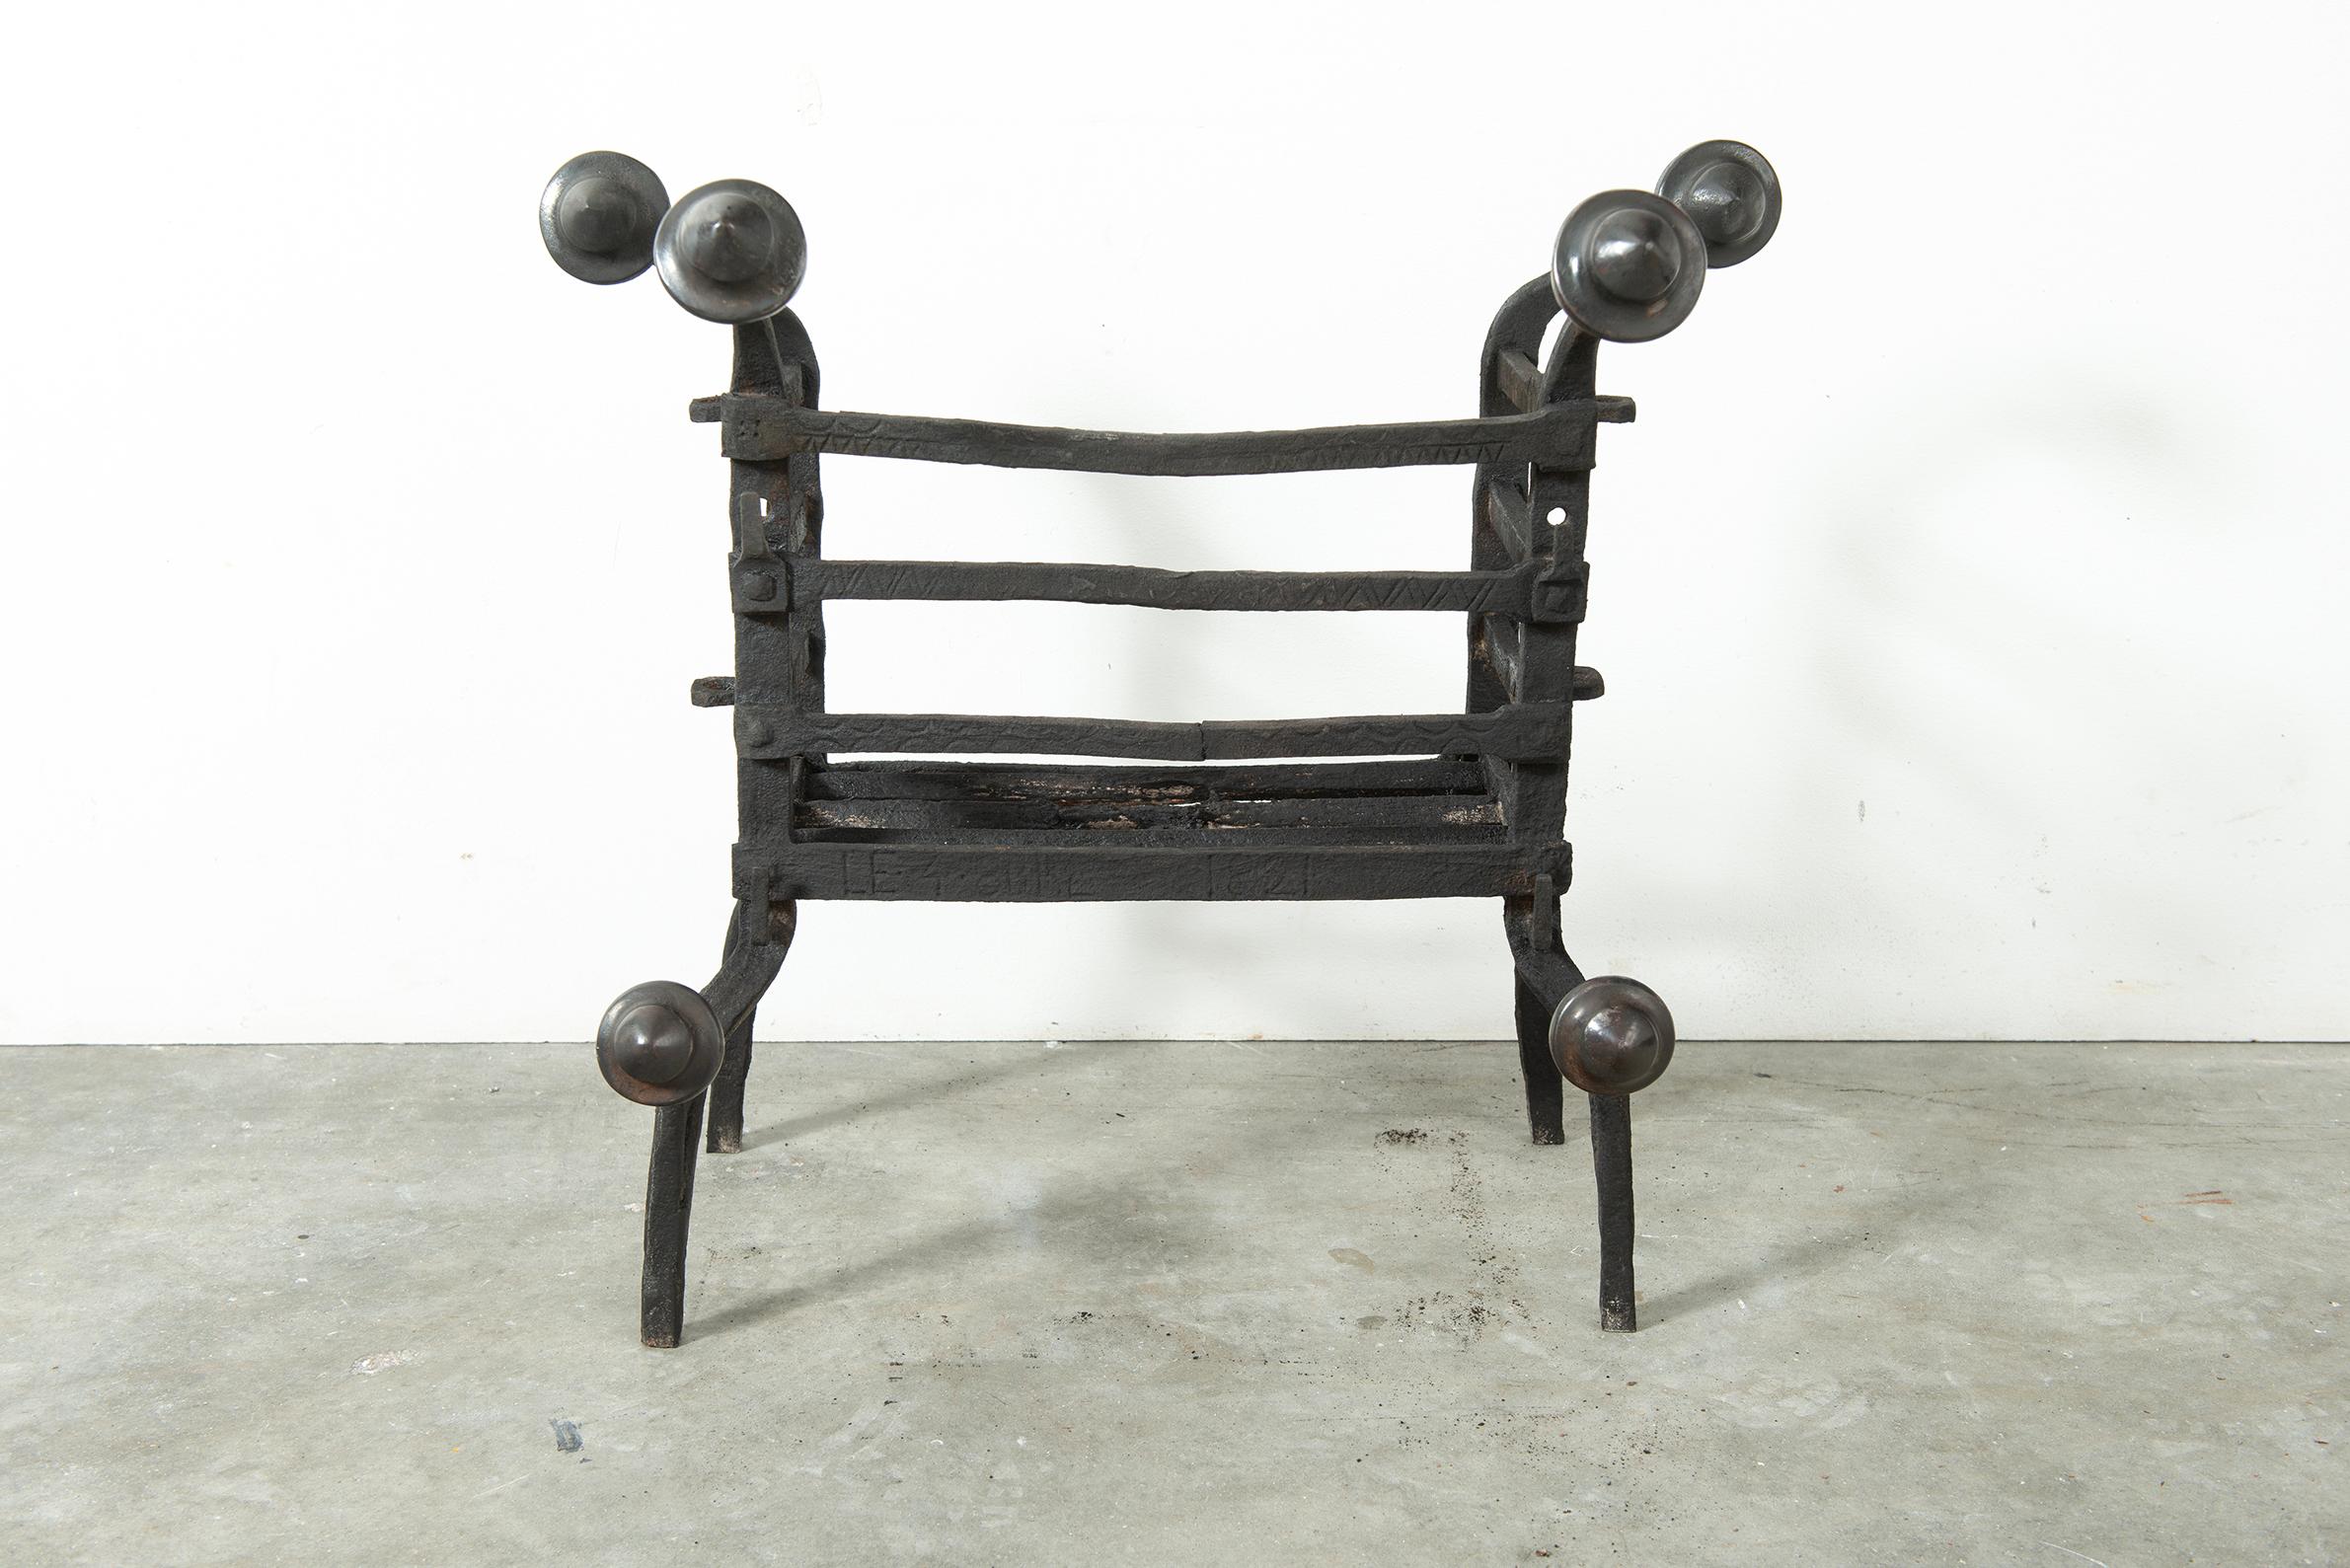 17th century Dutch wrought iron fireplace basket.
Great looking and very decorative piece, tremendous craftsmanship and detailed decoration. 

Great original and usable condition, works great in a real log fire.

Sold by Schermerhorn antique